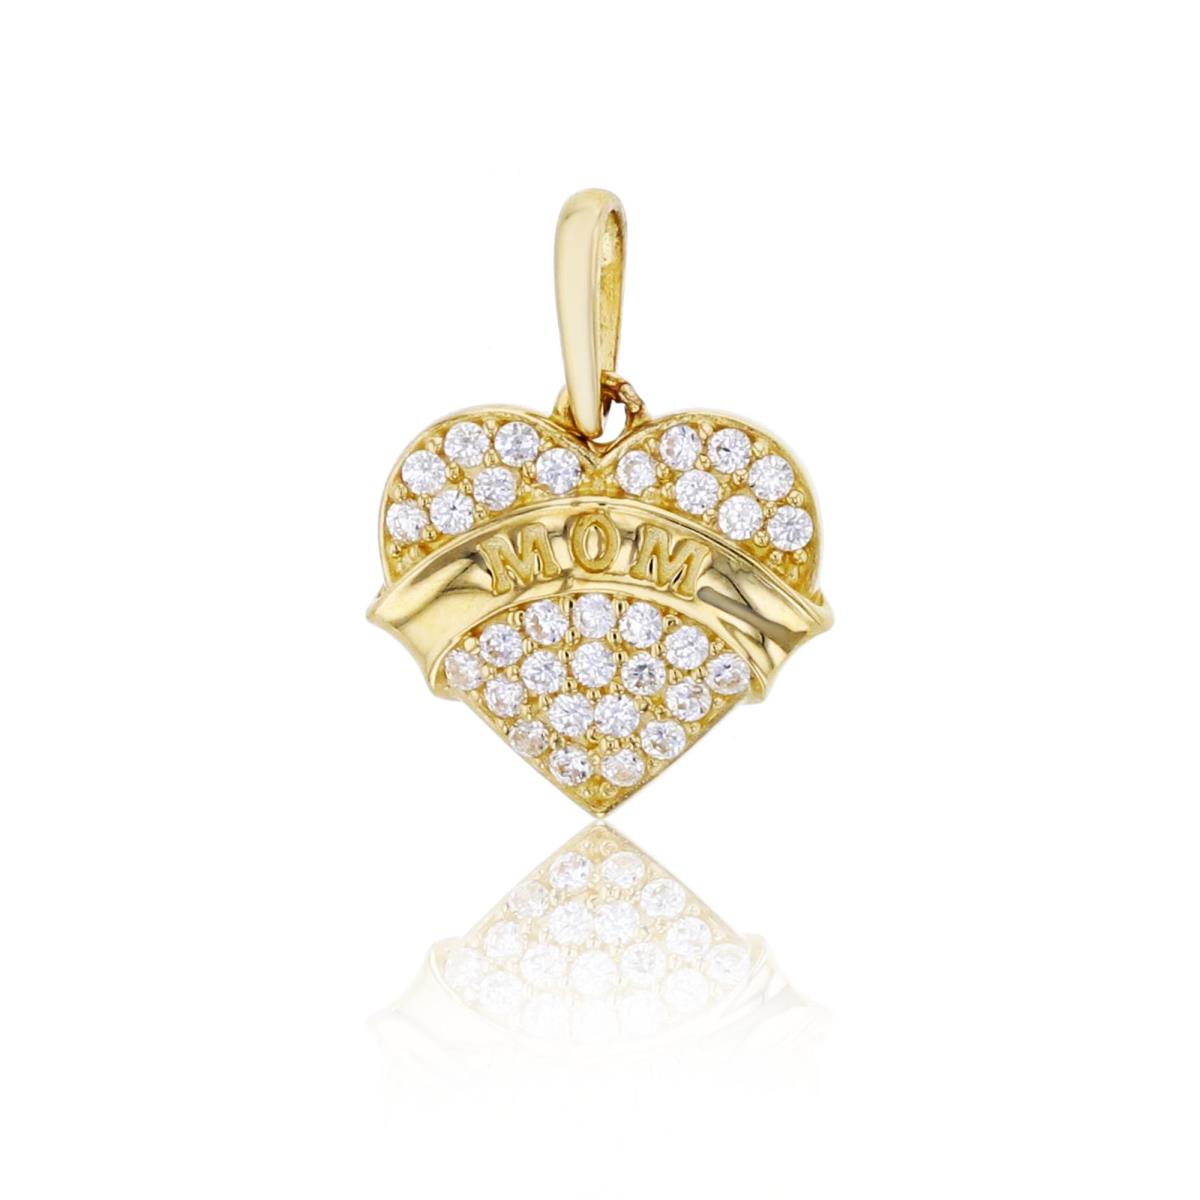 10K Yellow Gold 14x10mm Micropave CZ Heart with Engraved "MOM" Pendant